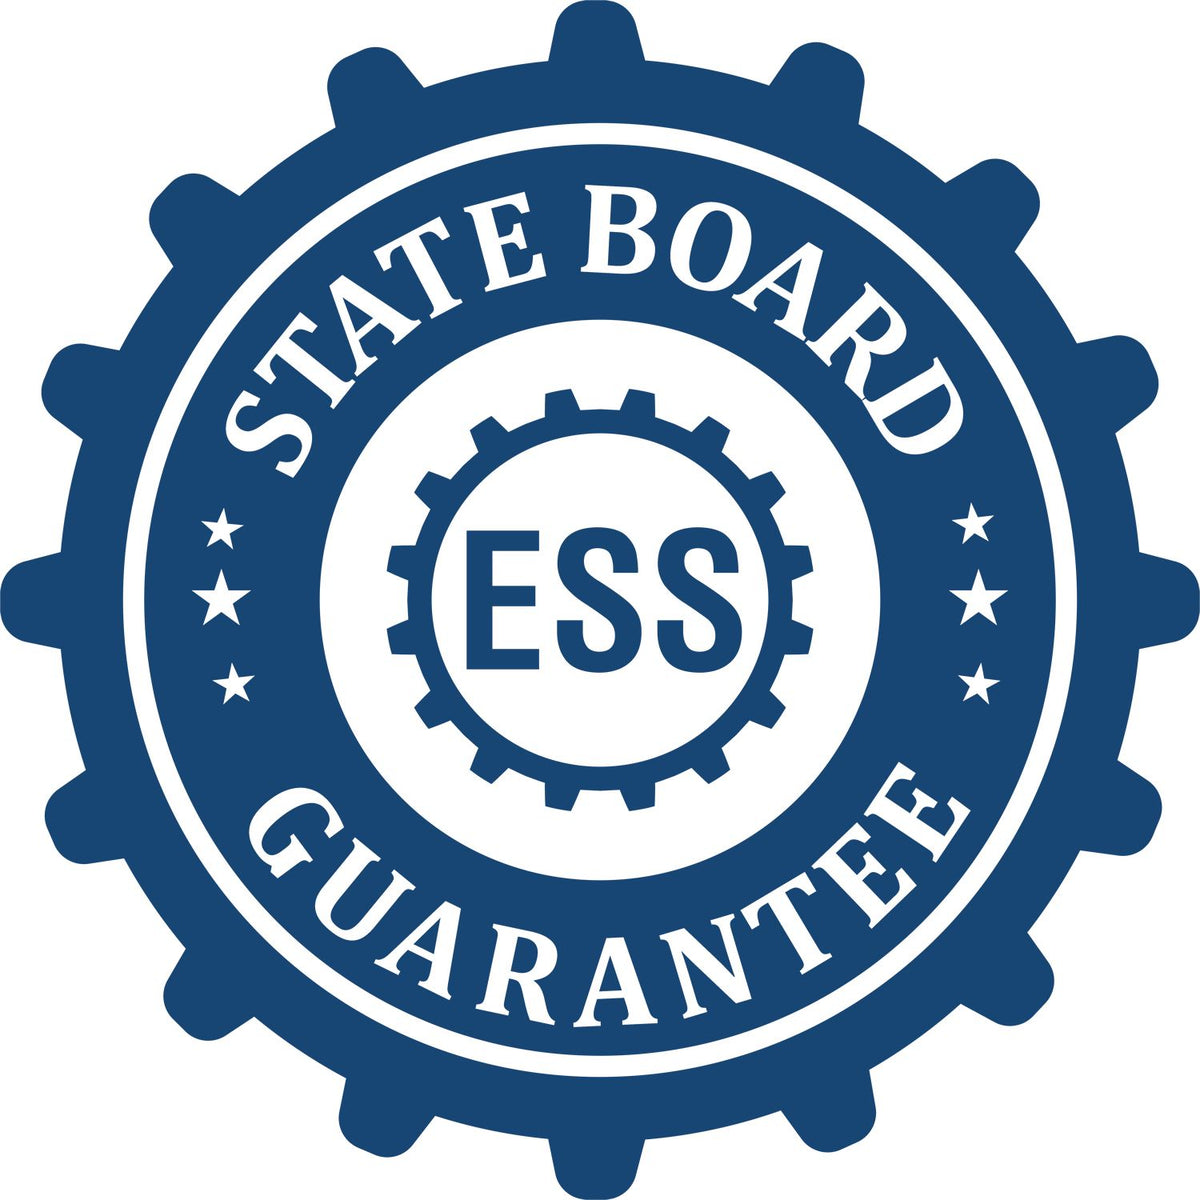 An emblem in a gear shape illustrating a state board guarantee for the Massachusetts Professional Geologist Seal Stamp